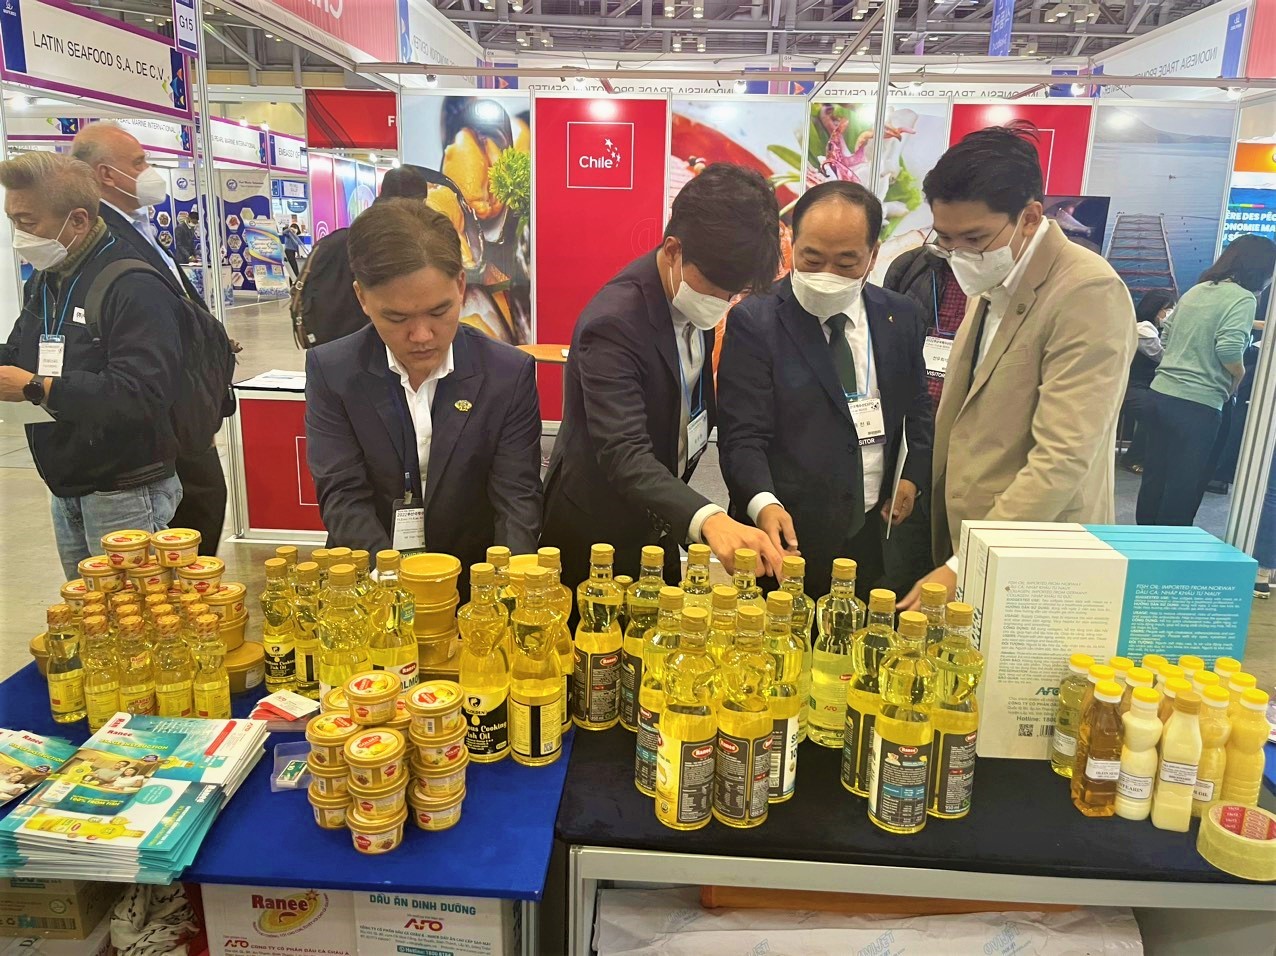 Ranee fish cooking oil to be launched at Korea Fair in 2022